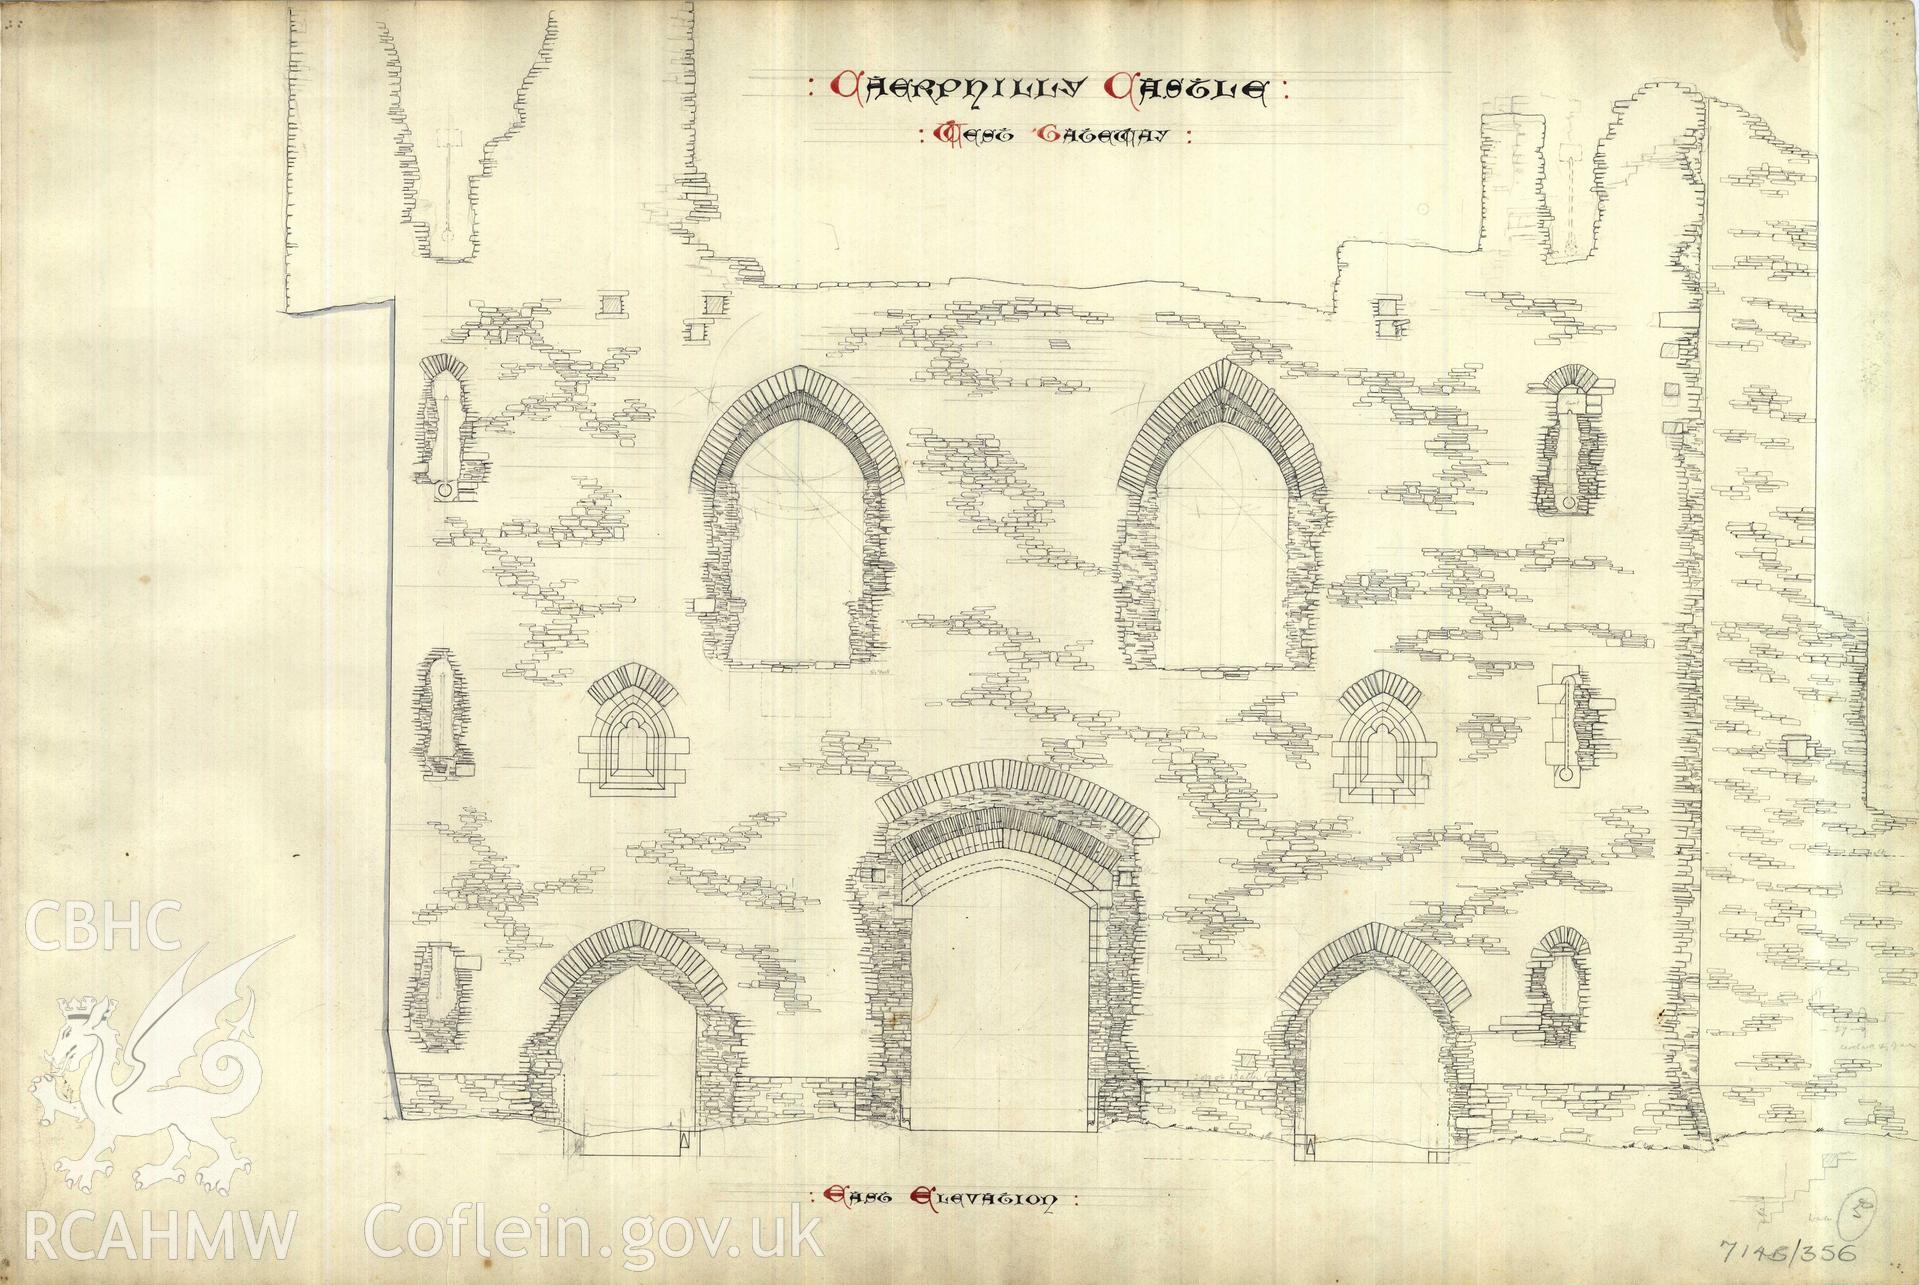 Cadw guardianship monument drawing of Caerphilly Castle. Inner W gate, E (rear) elev. Cadw Ref. No:714B/356. Scale 1:24.